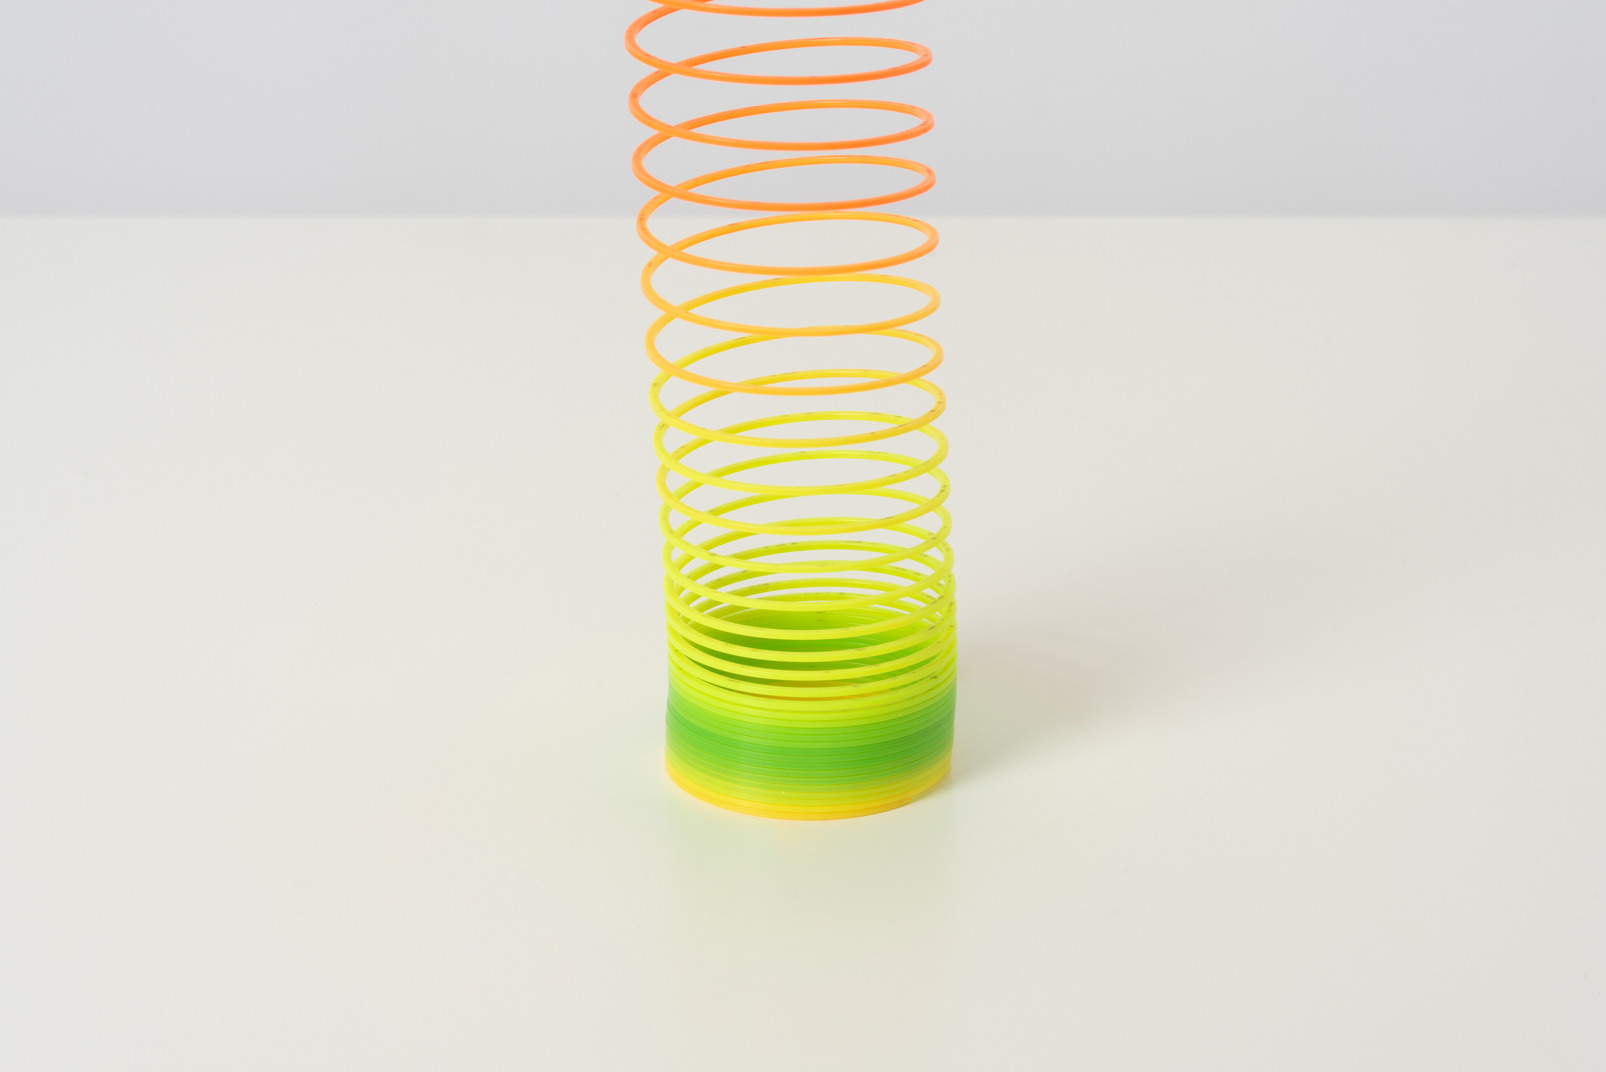 A colorful slinky toy being unbearably long